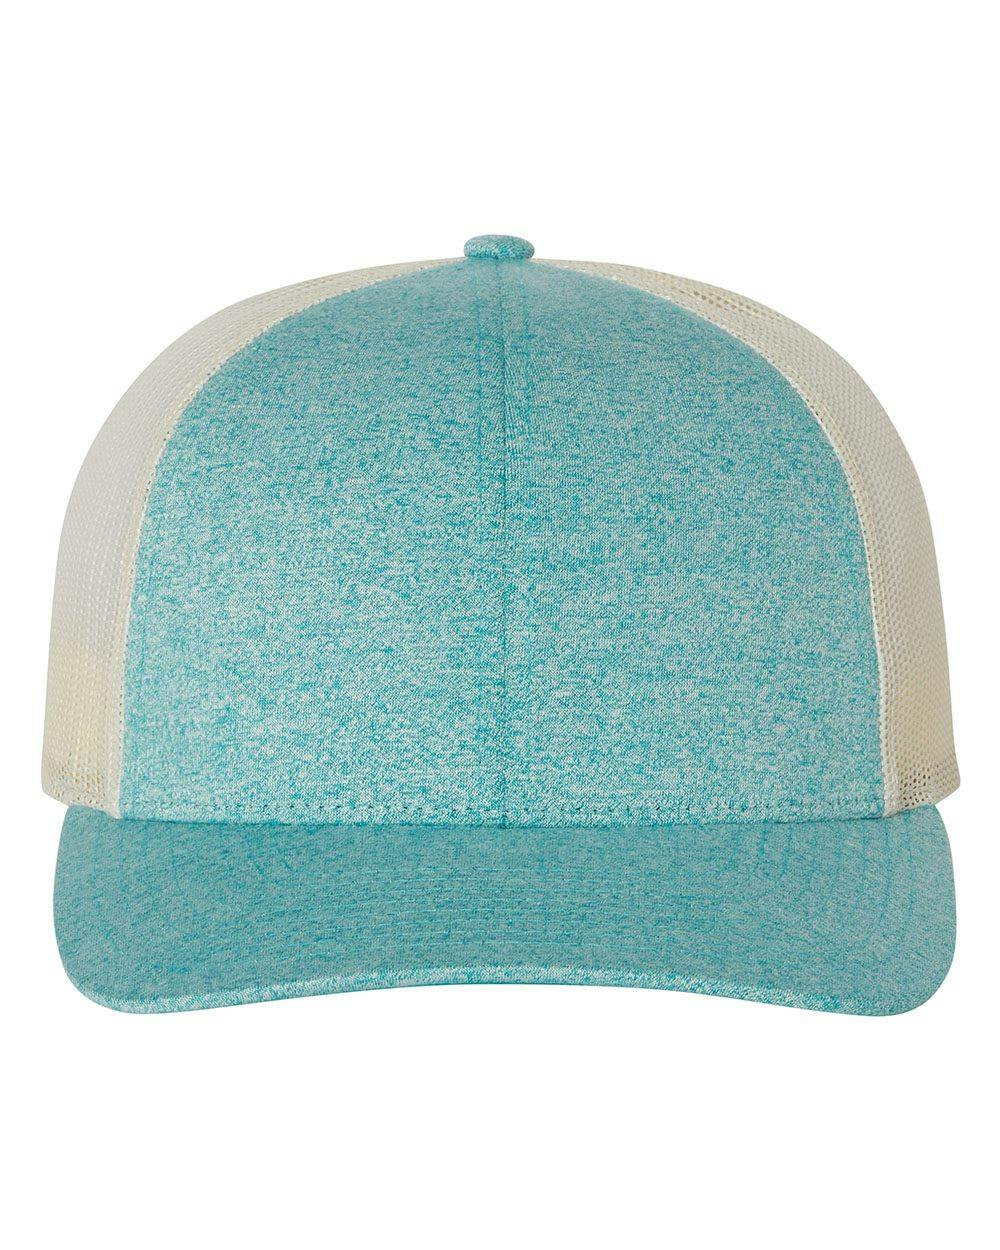 Image for Low Pro Heather Trucker Cap - 115CH